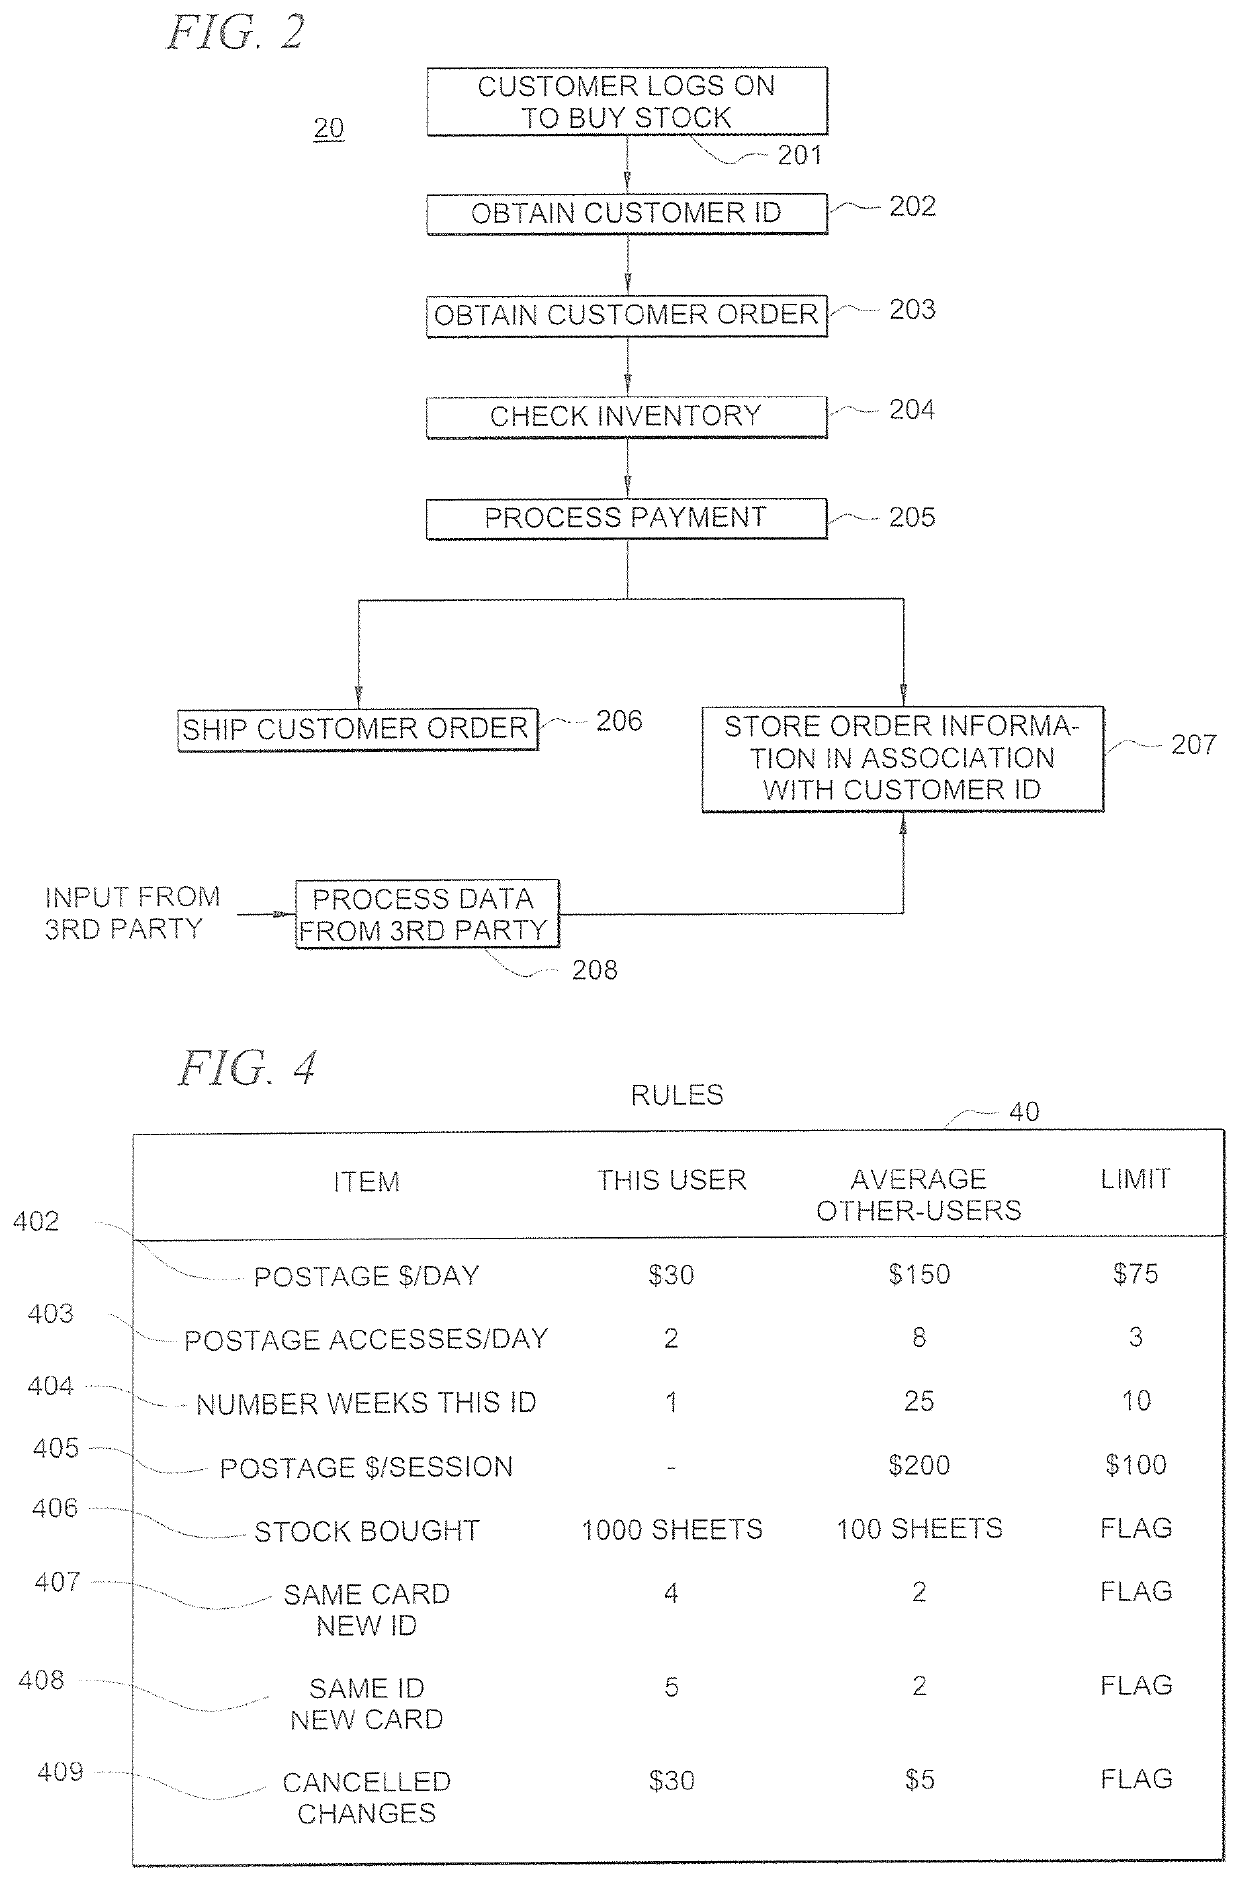 System and method for identifying and preventing on-line fraud